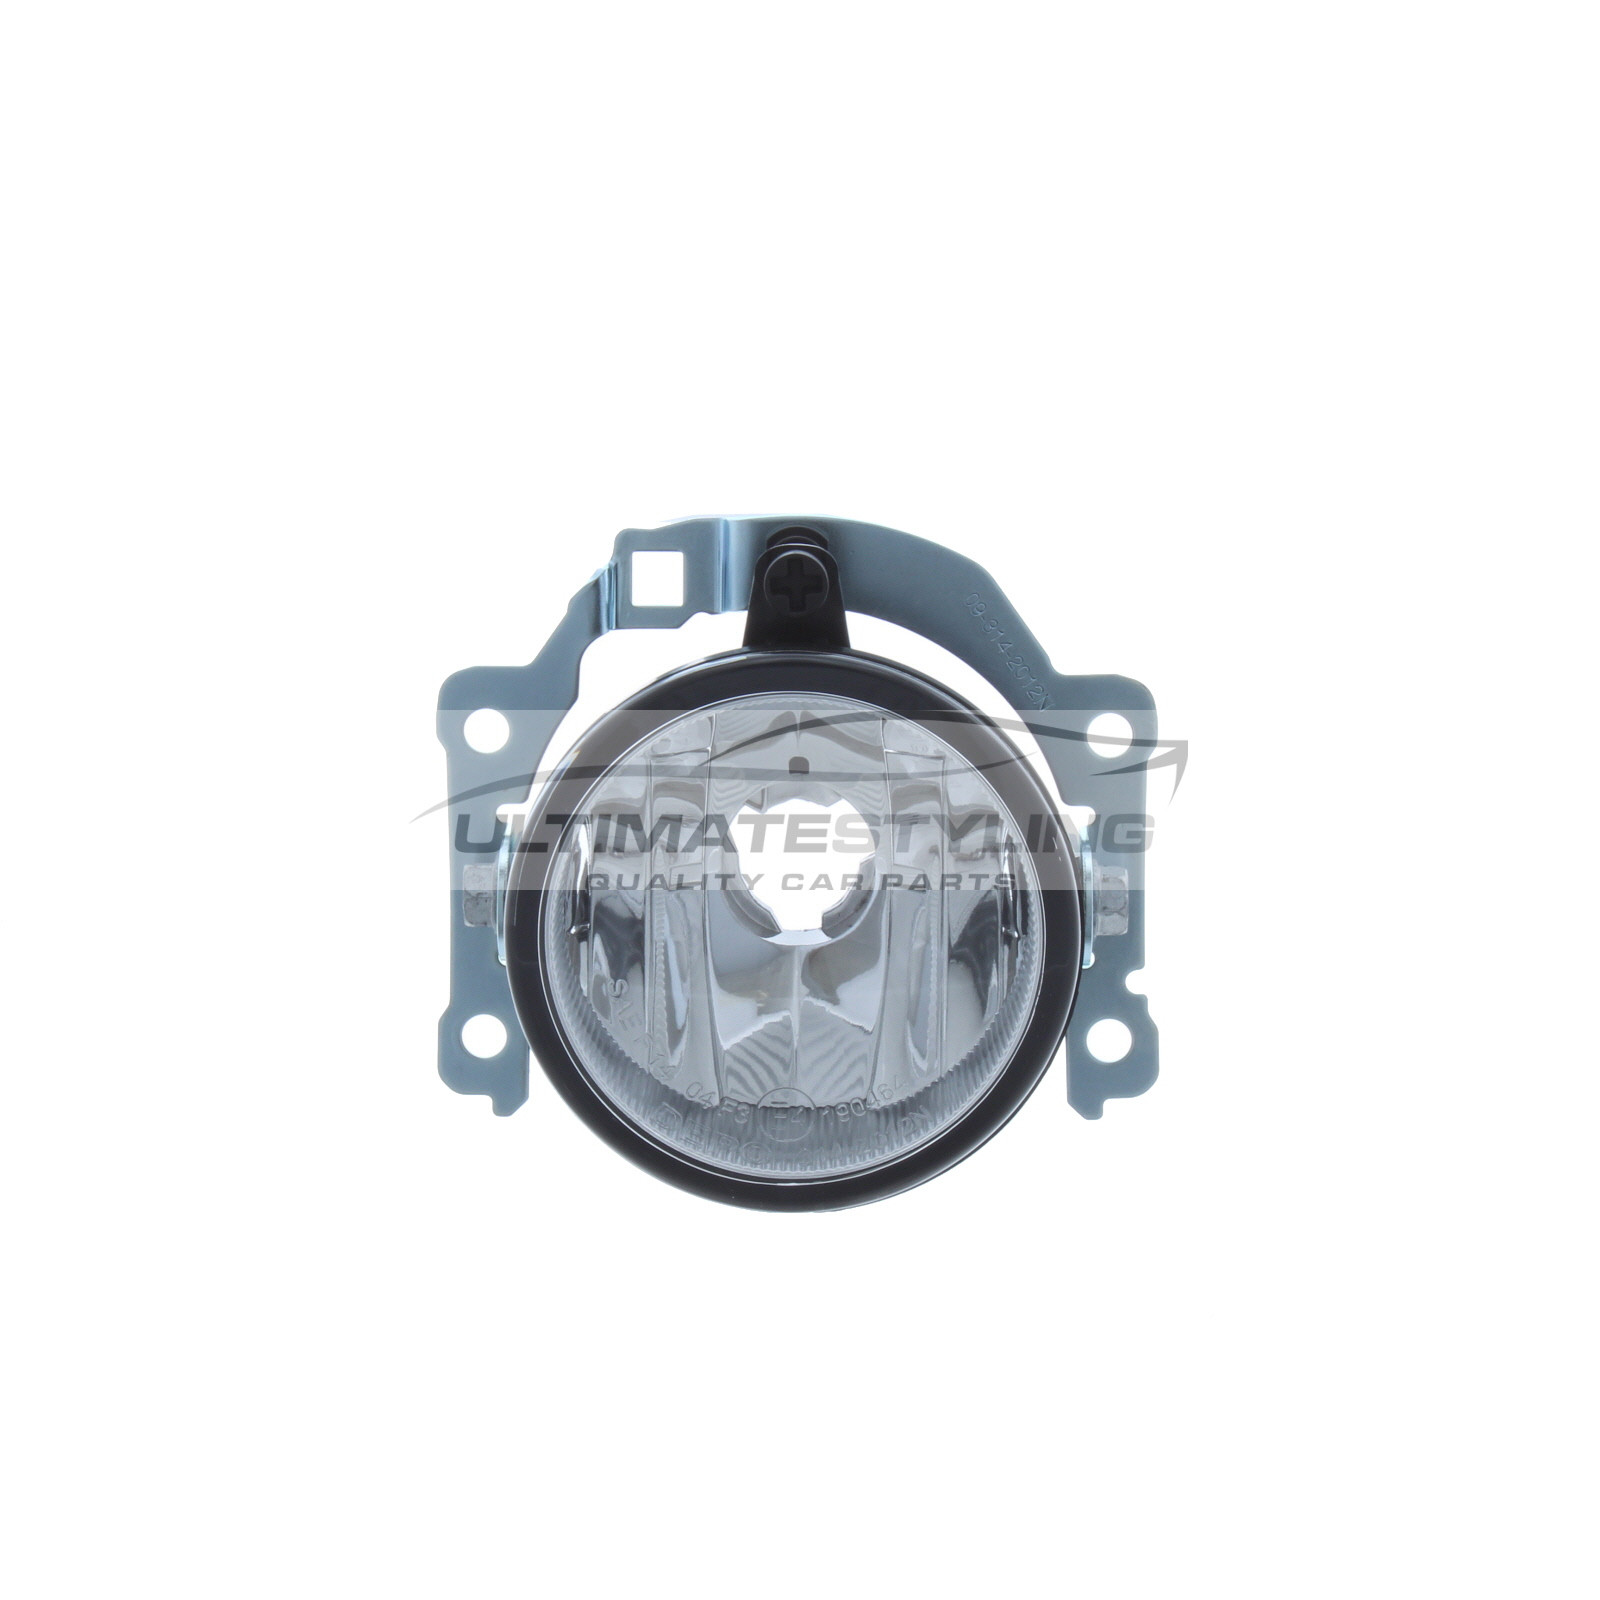 Mitsubishi Outlander 2015-2020 Front Fog Light Chrome Inner (Non-LED) Round - Includes Metal Backing Plate Universal (LH or RH)